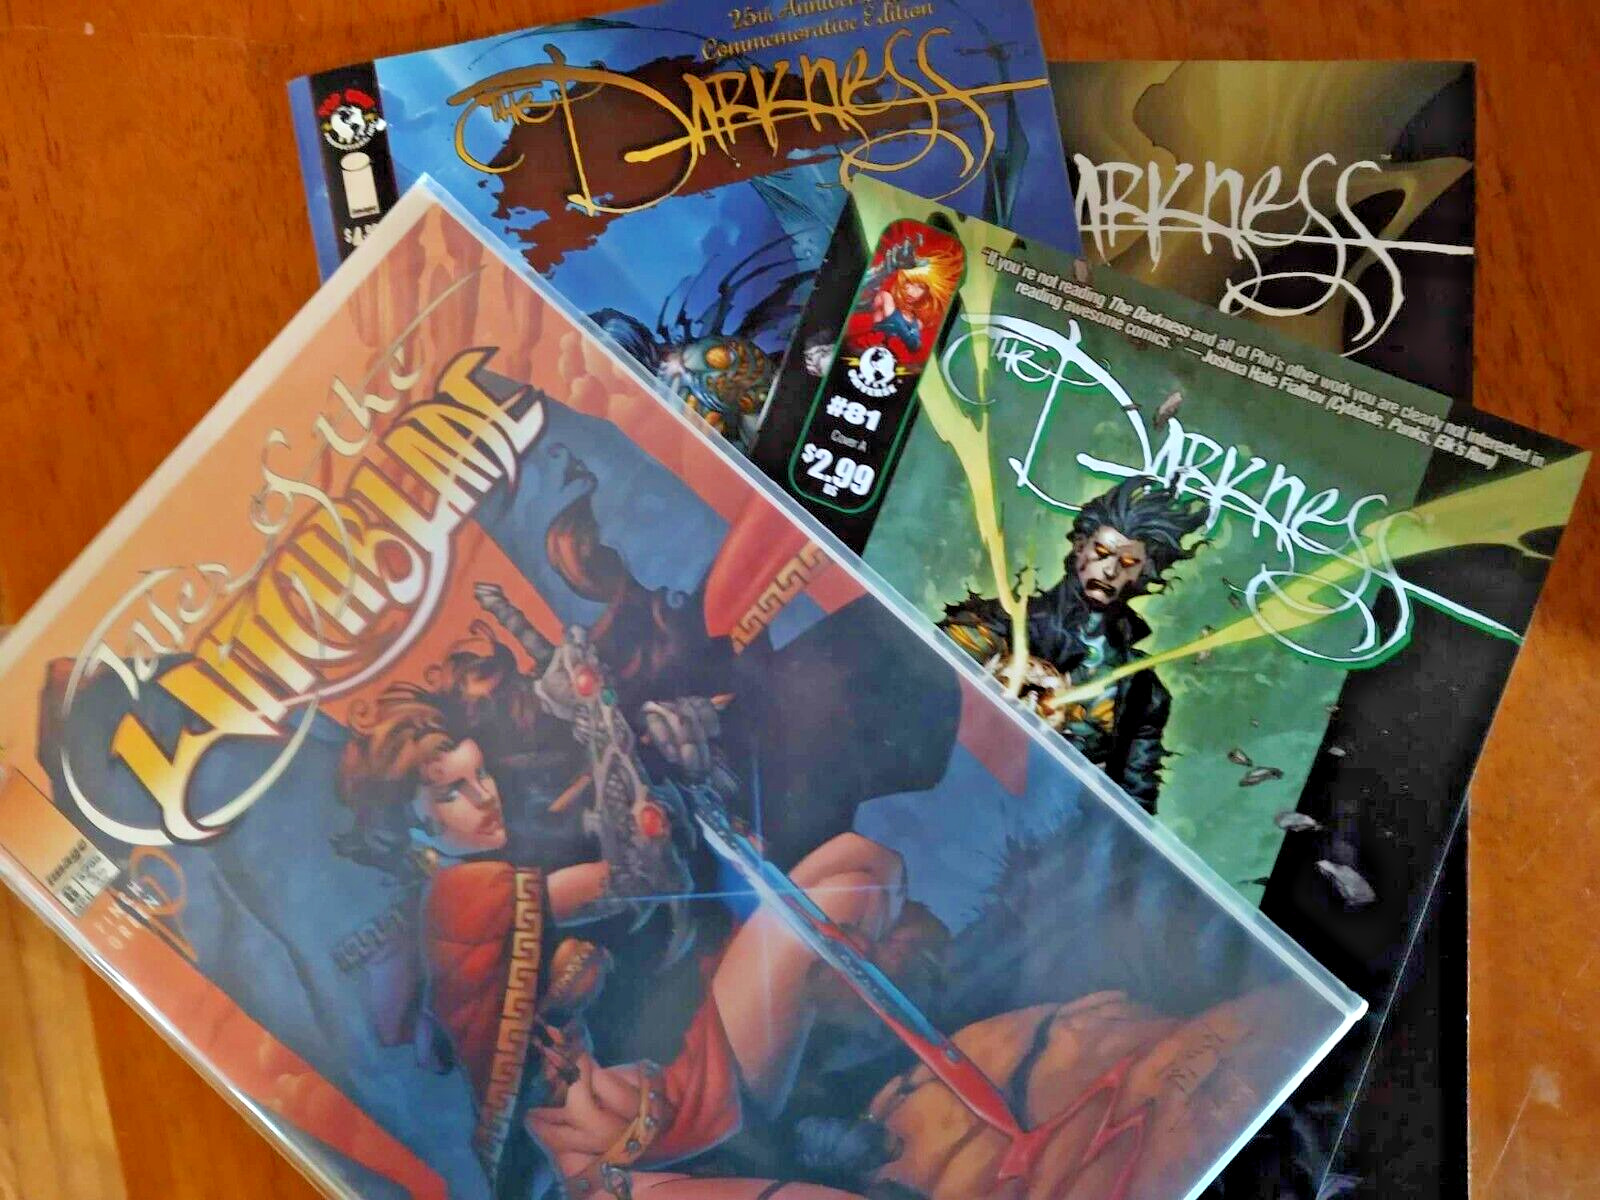 The Darkness #1 and #5 Garth Ennis Plus #81 and Tales from Witchblade #6